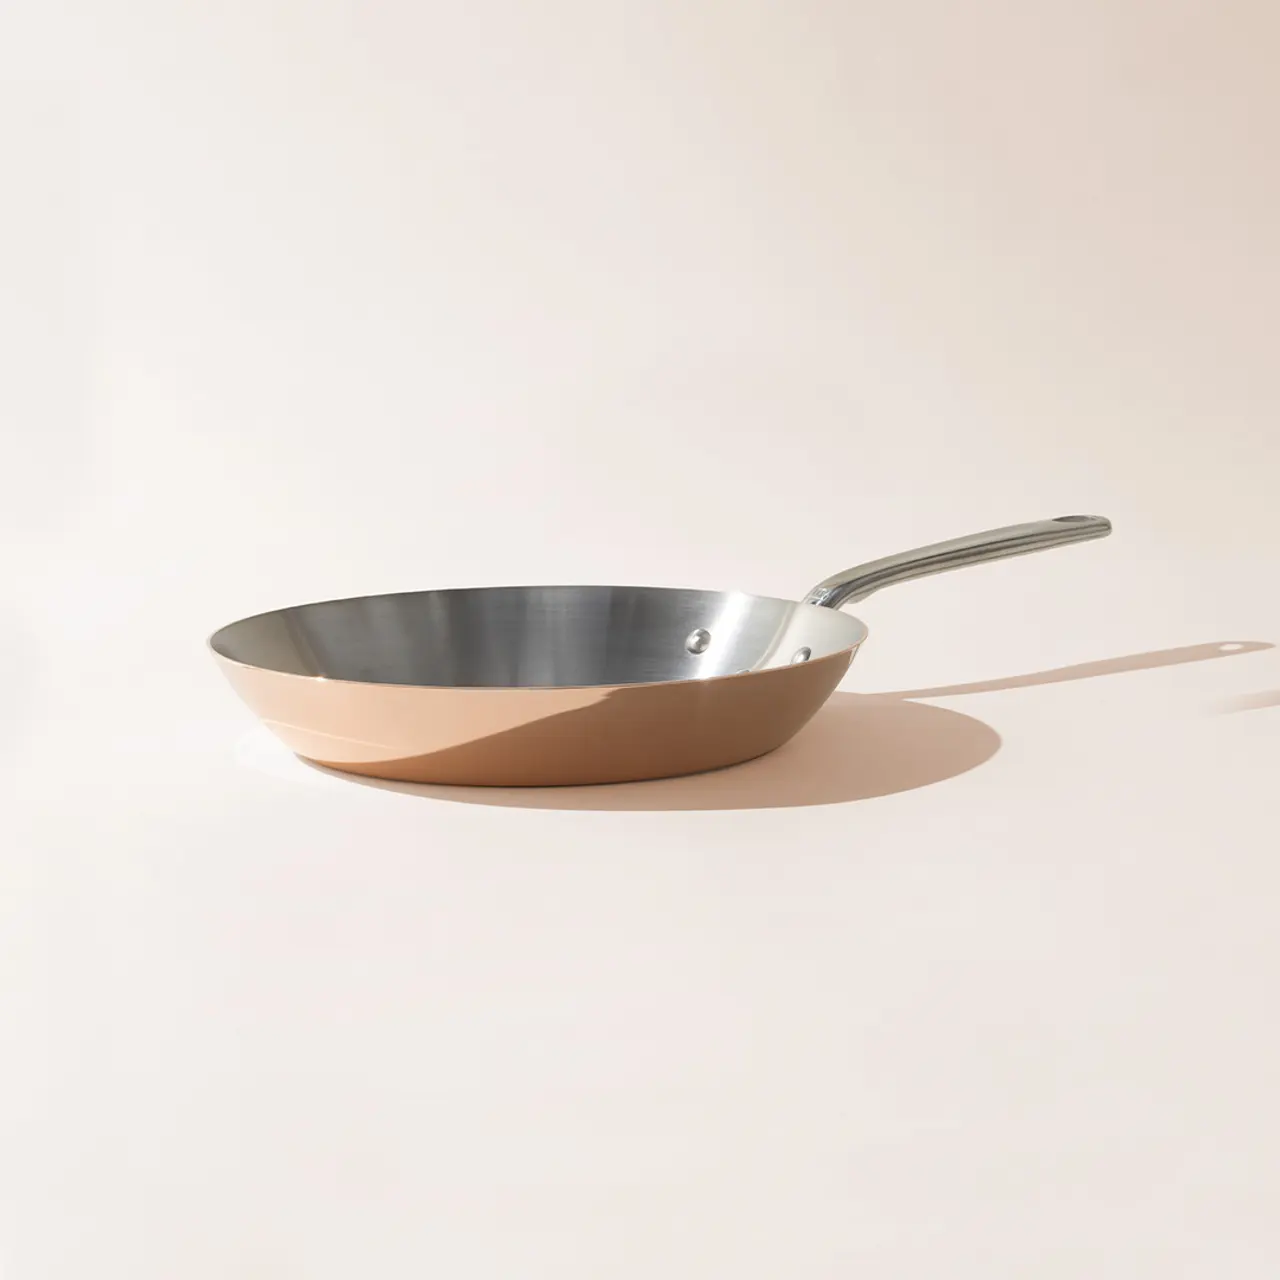 A stainless steel frying pan with a long handle is positioned against a light background, casting a sharp shadow.